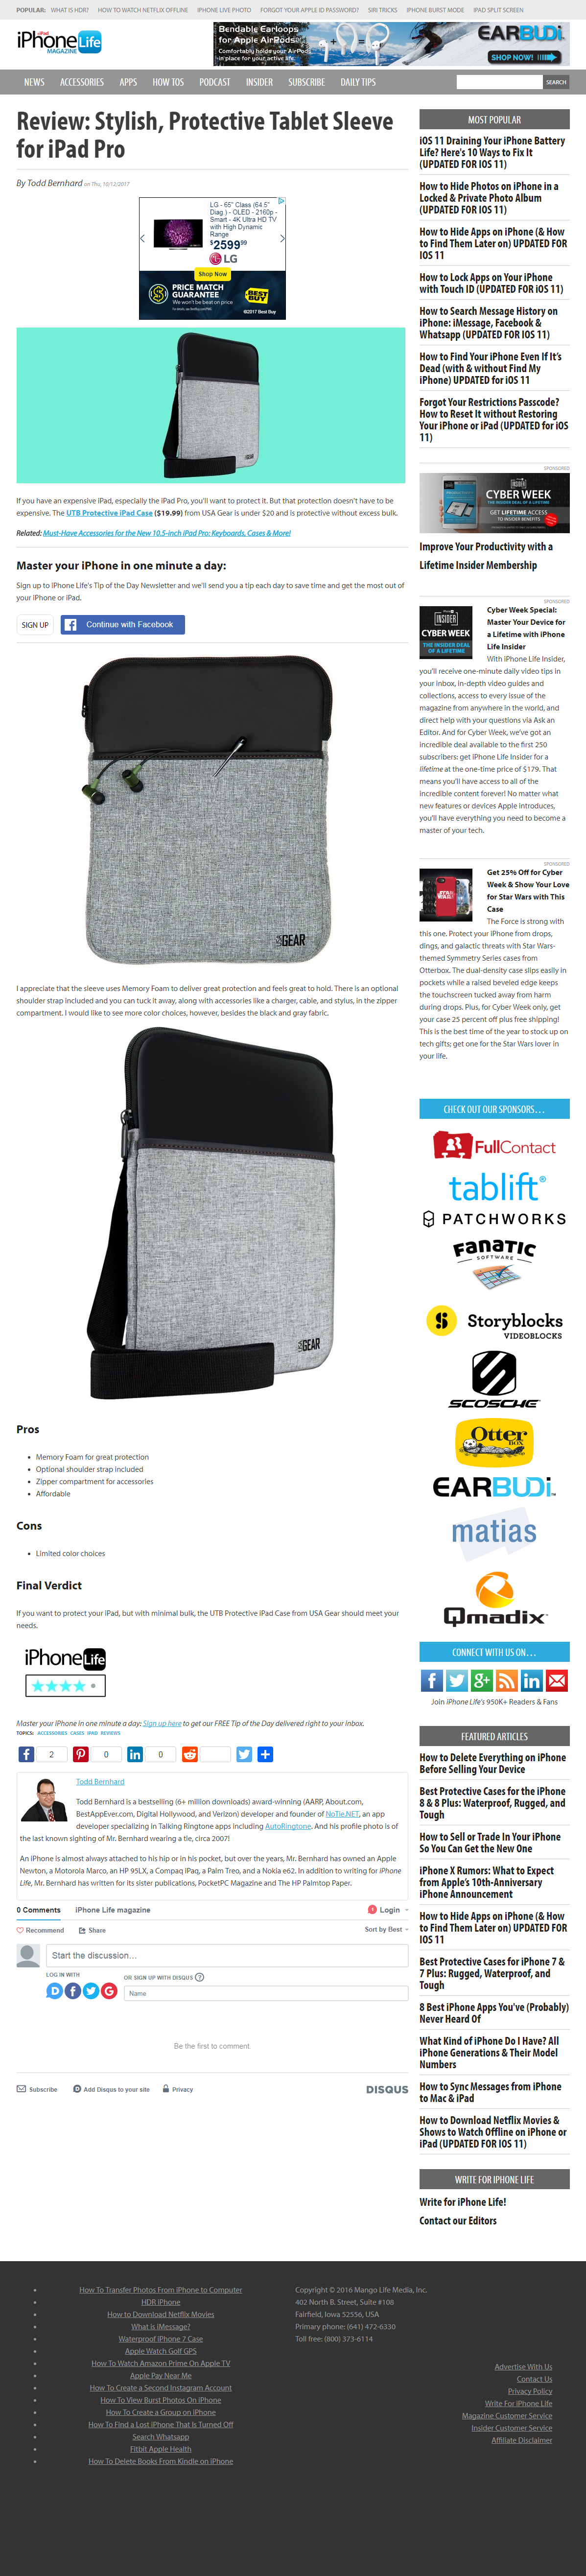 Review: Stylish, Protective Tablet Sleeve for iPad Pro